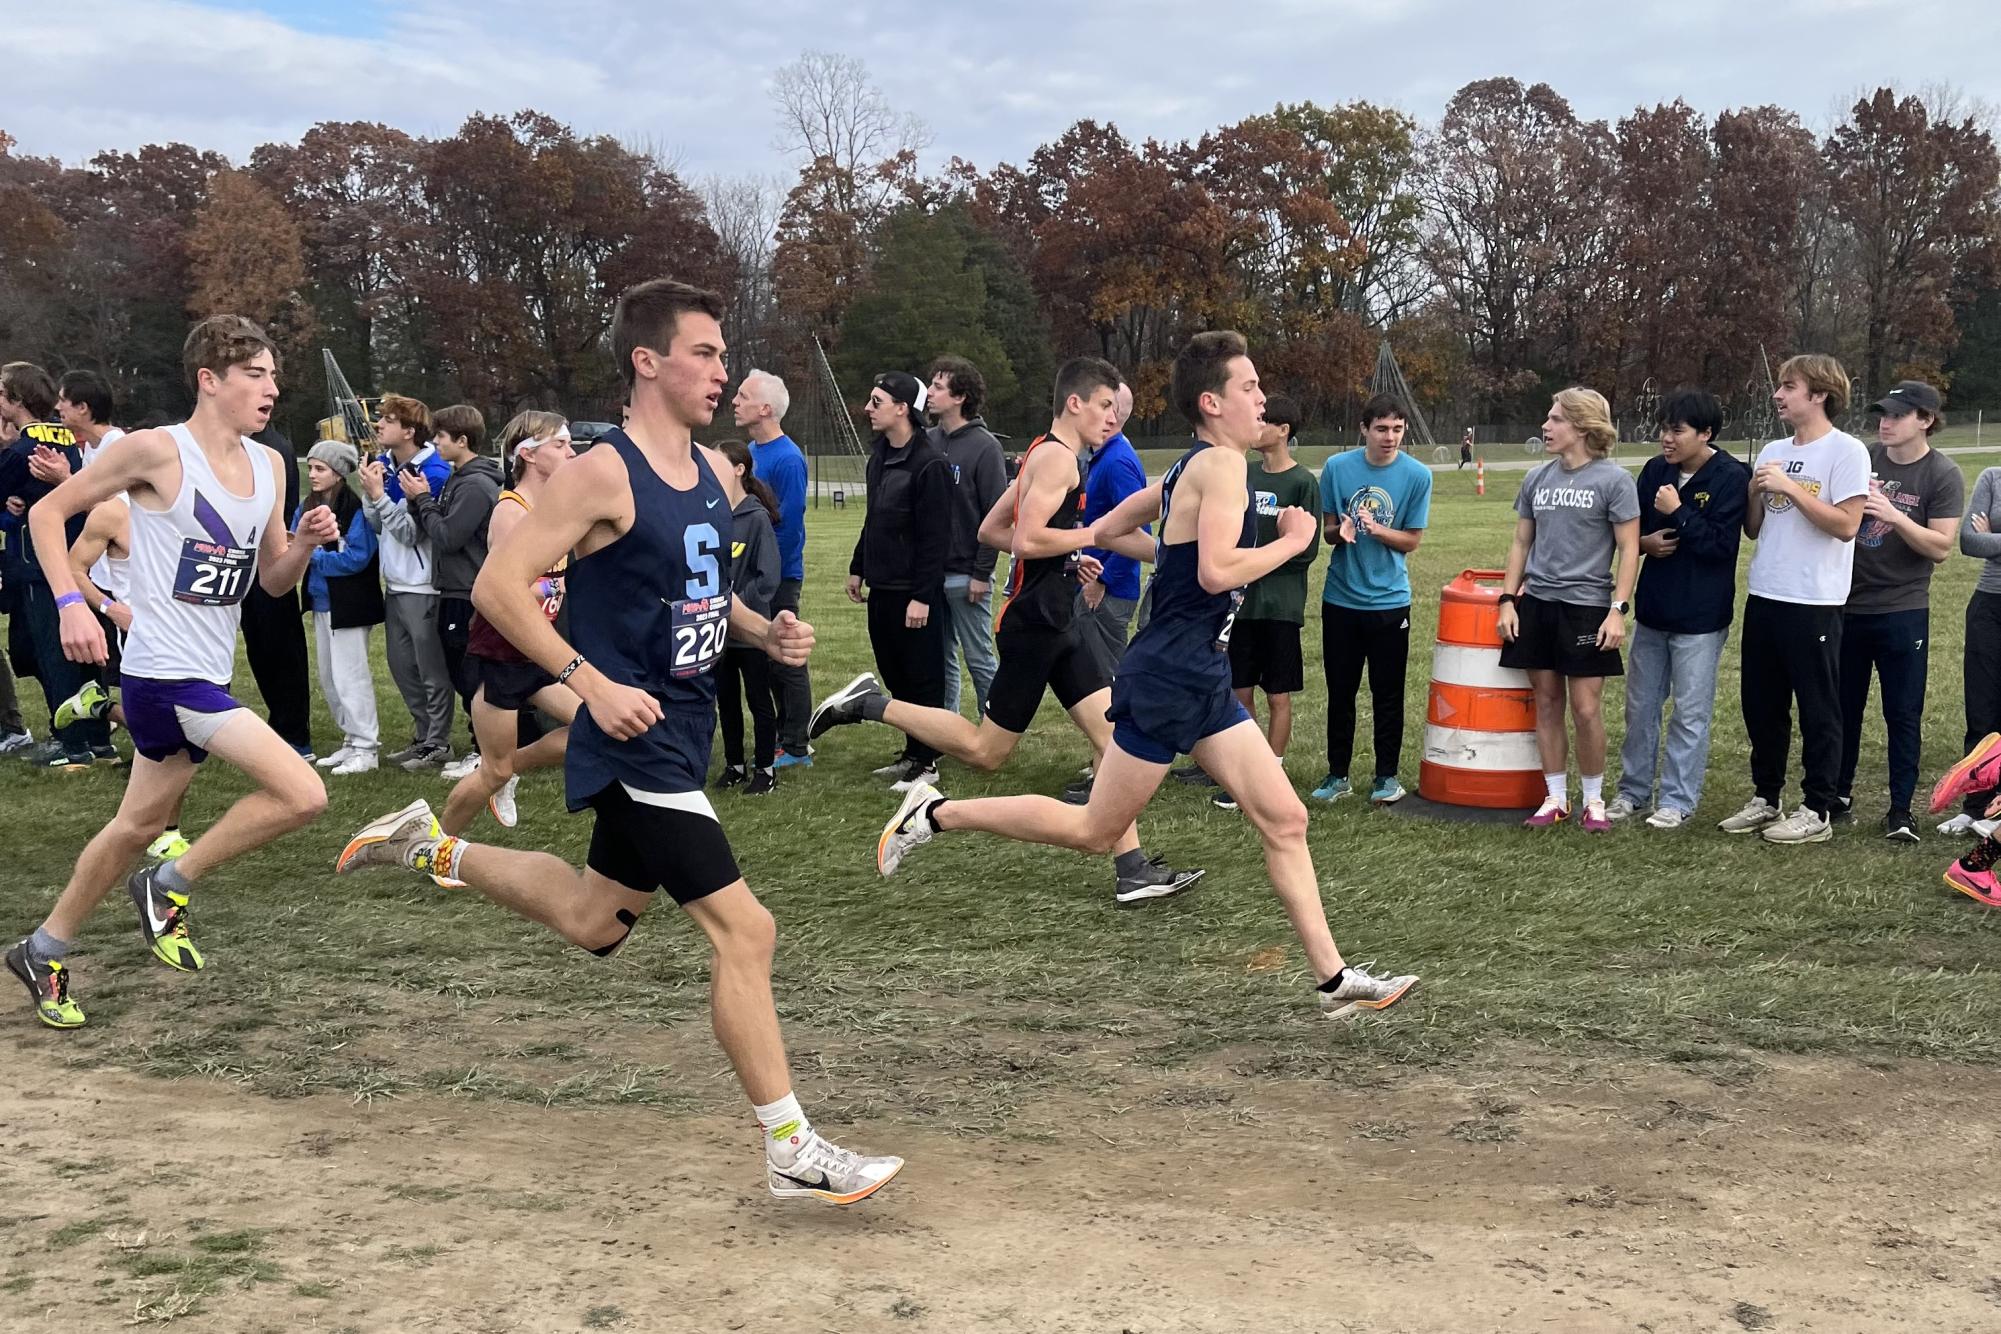 Mason Jett (’24) and Luke Suliman (’24) work together to pass competitors. Credit: C. Brush.